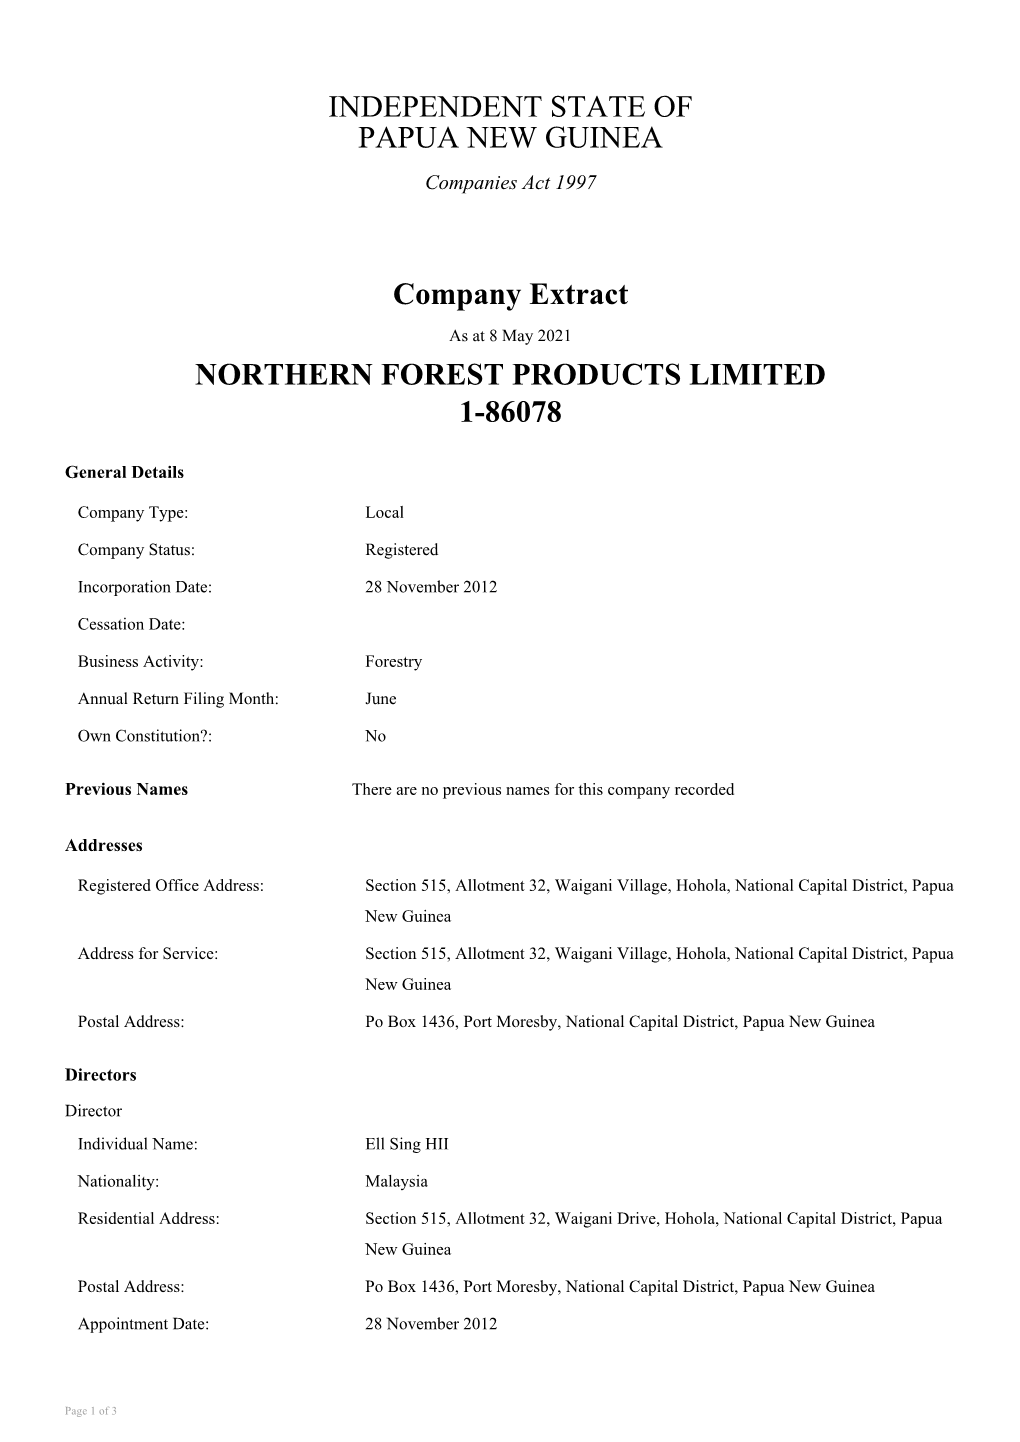 INDEPENDENT STATE of PAPUA NEW GUINEA Company Extract